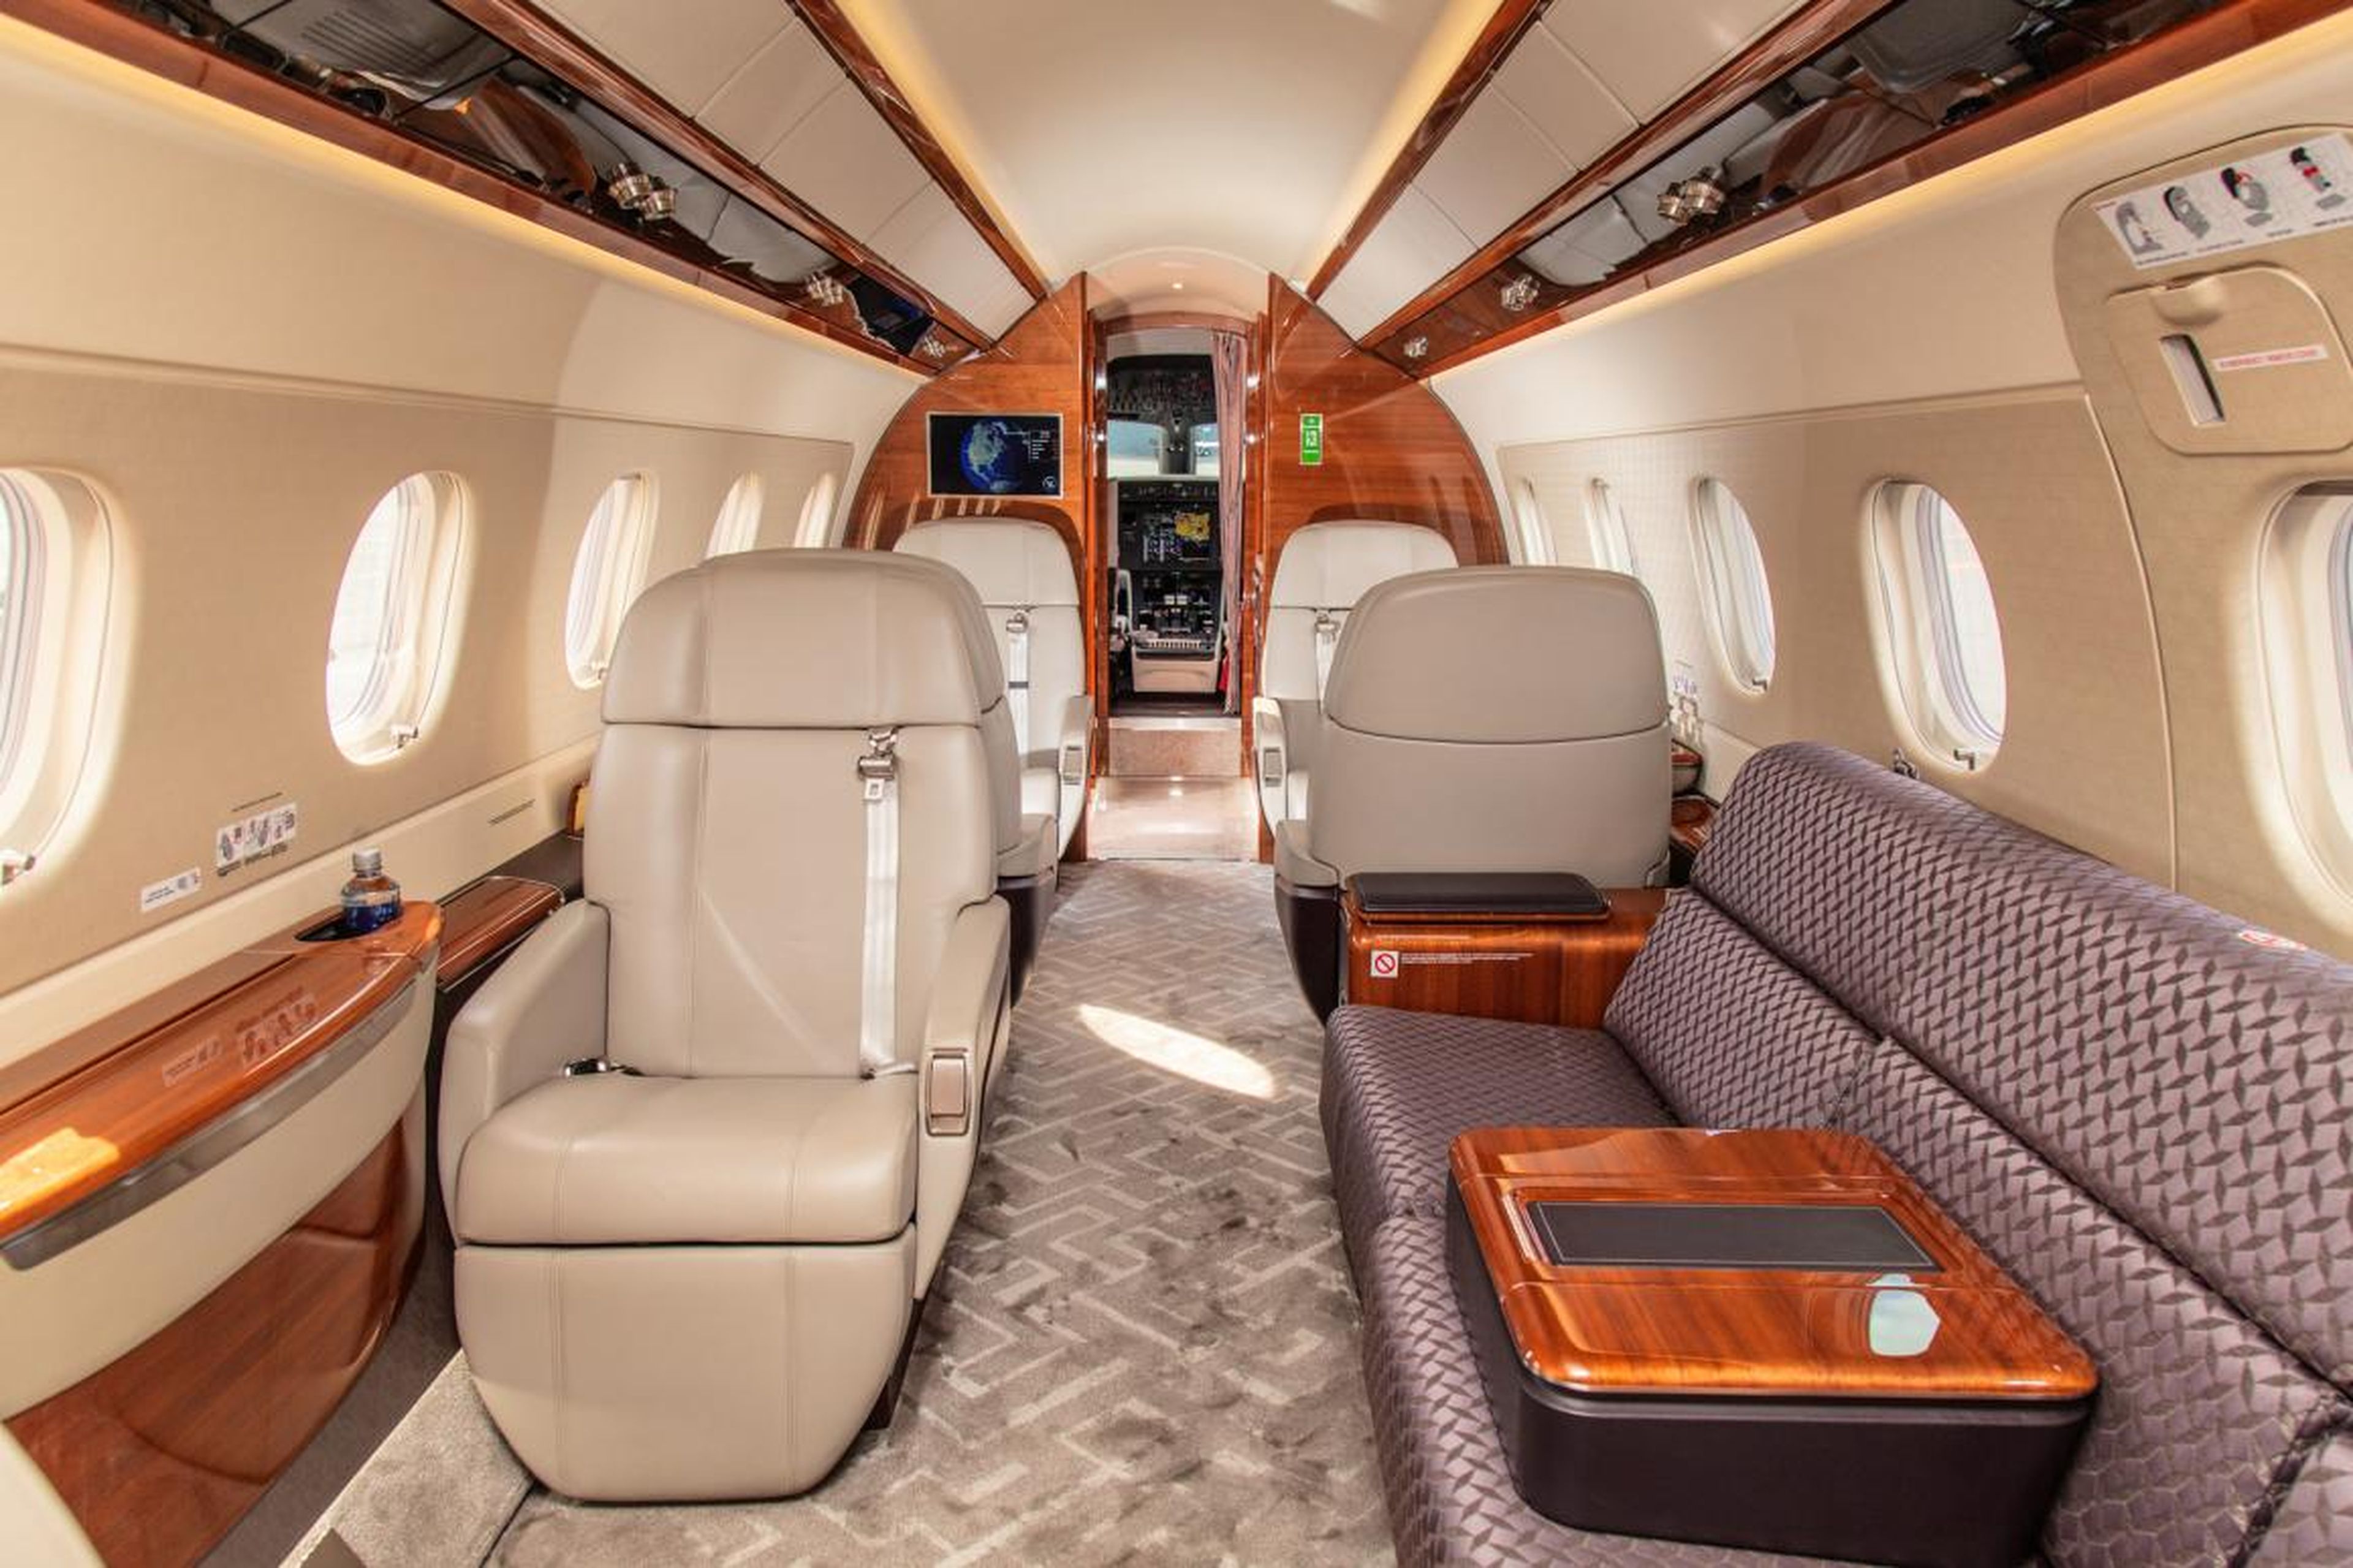 According to Embraer, the Legacy 500 has the roomiest cabin in its class and the only one that allows passengers to stand up without the need of a footwell running along the middle of the plane.